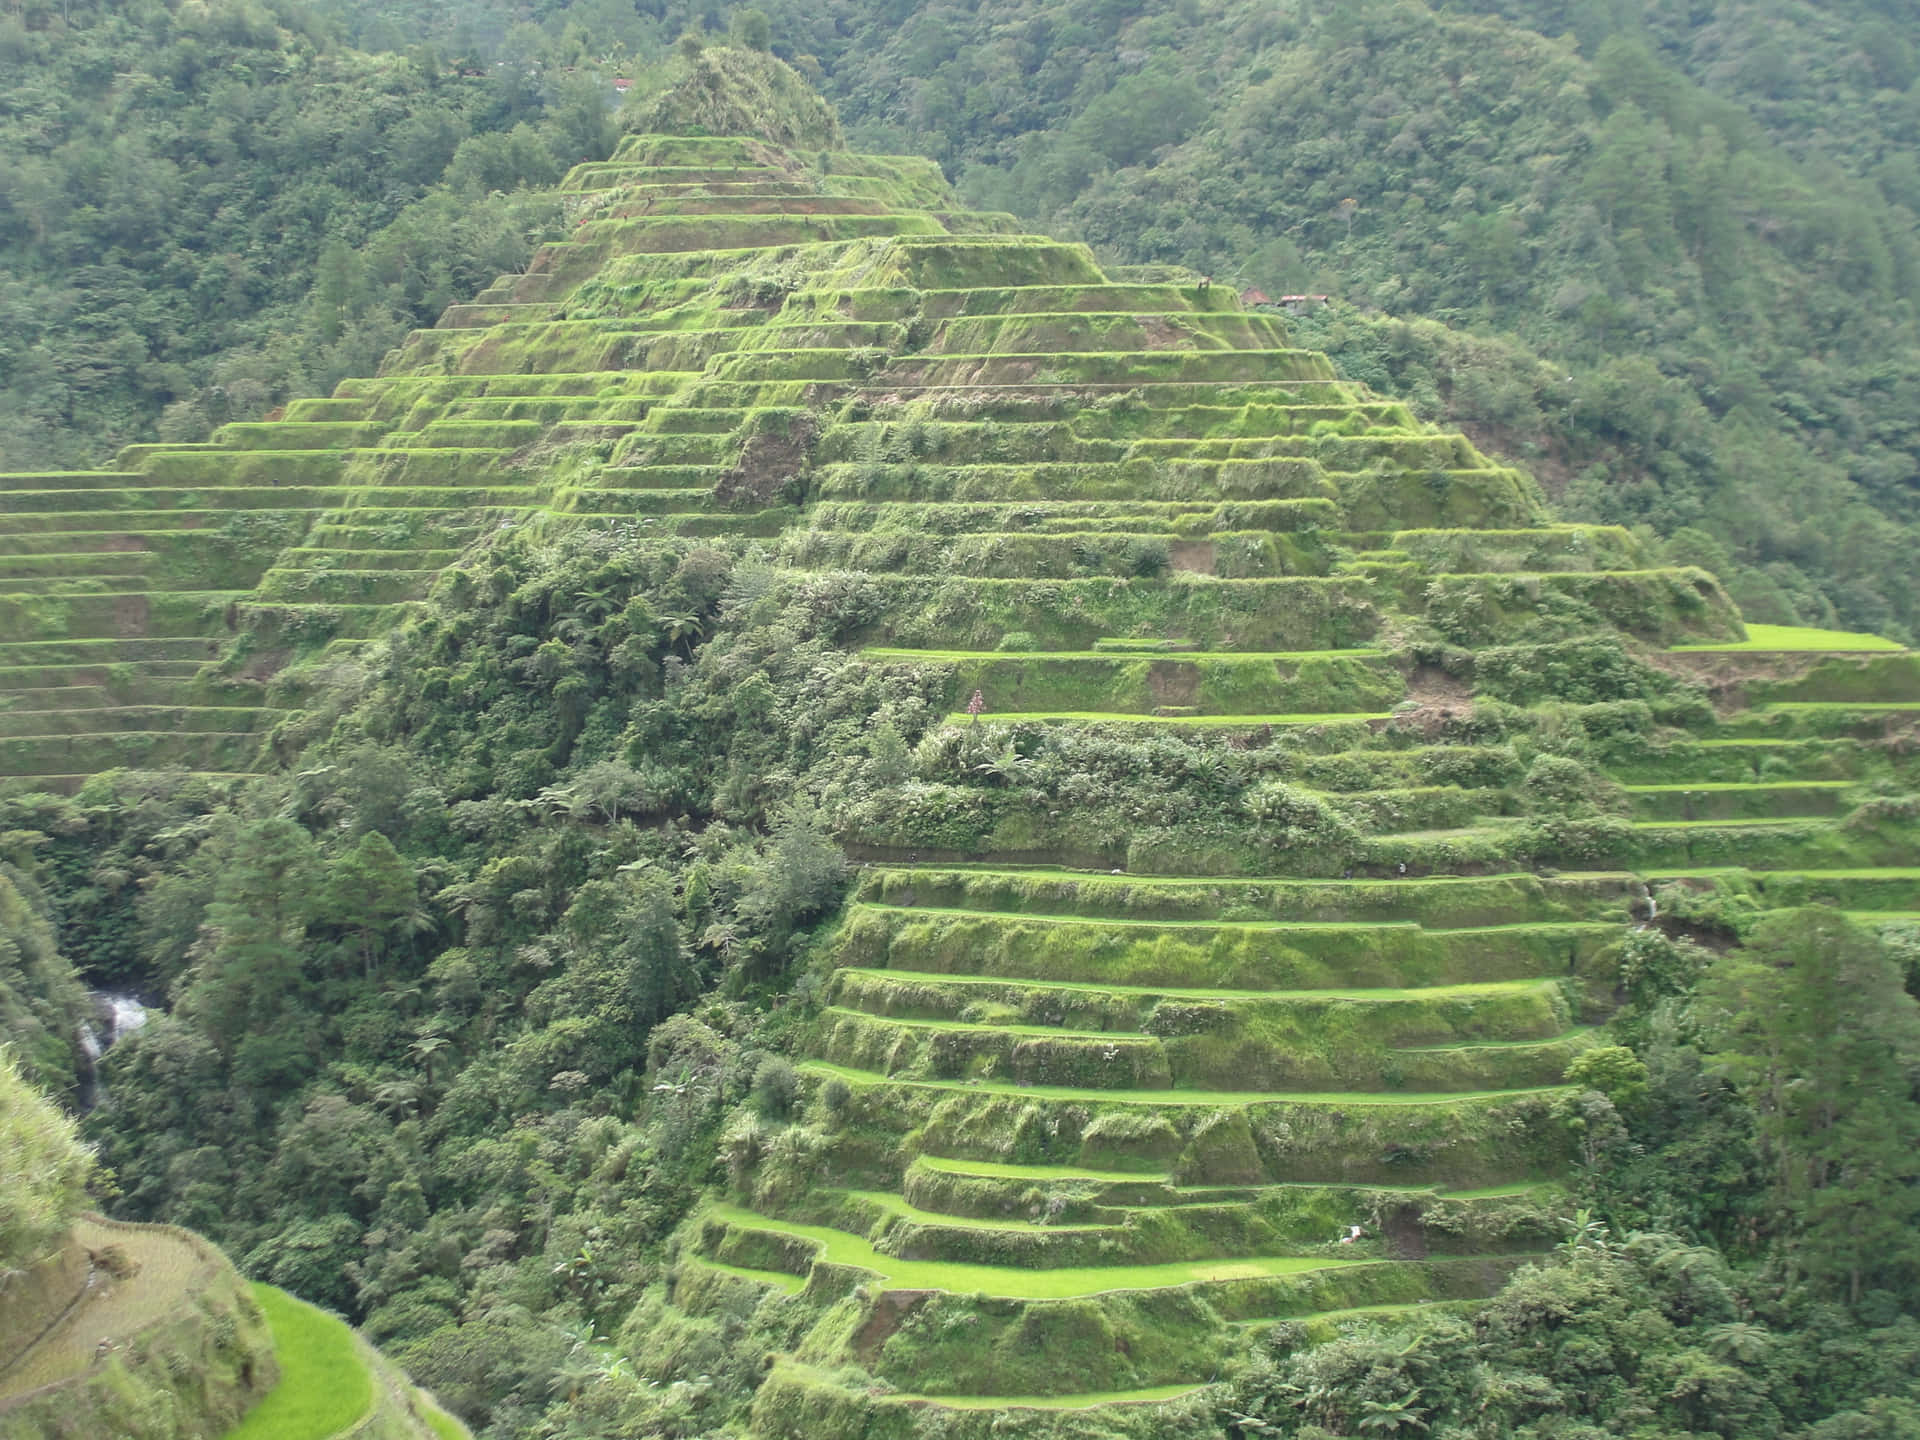 Caption: Majestic Banaue Rice Terraces in the Philippines Wallpaper